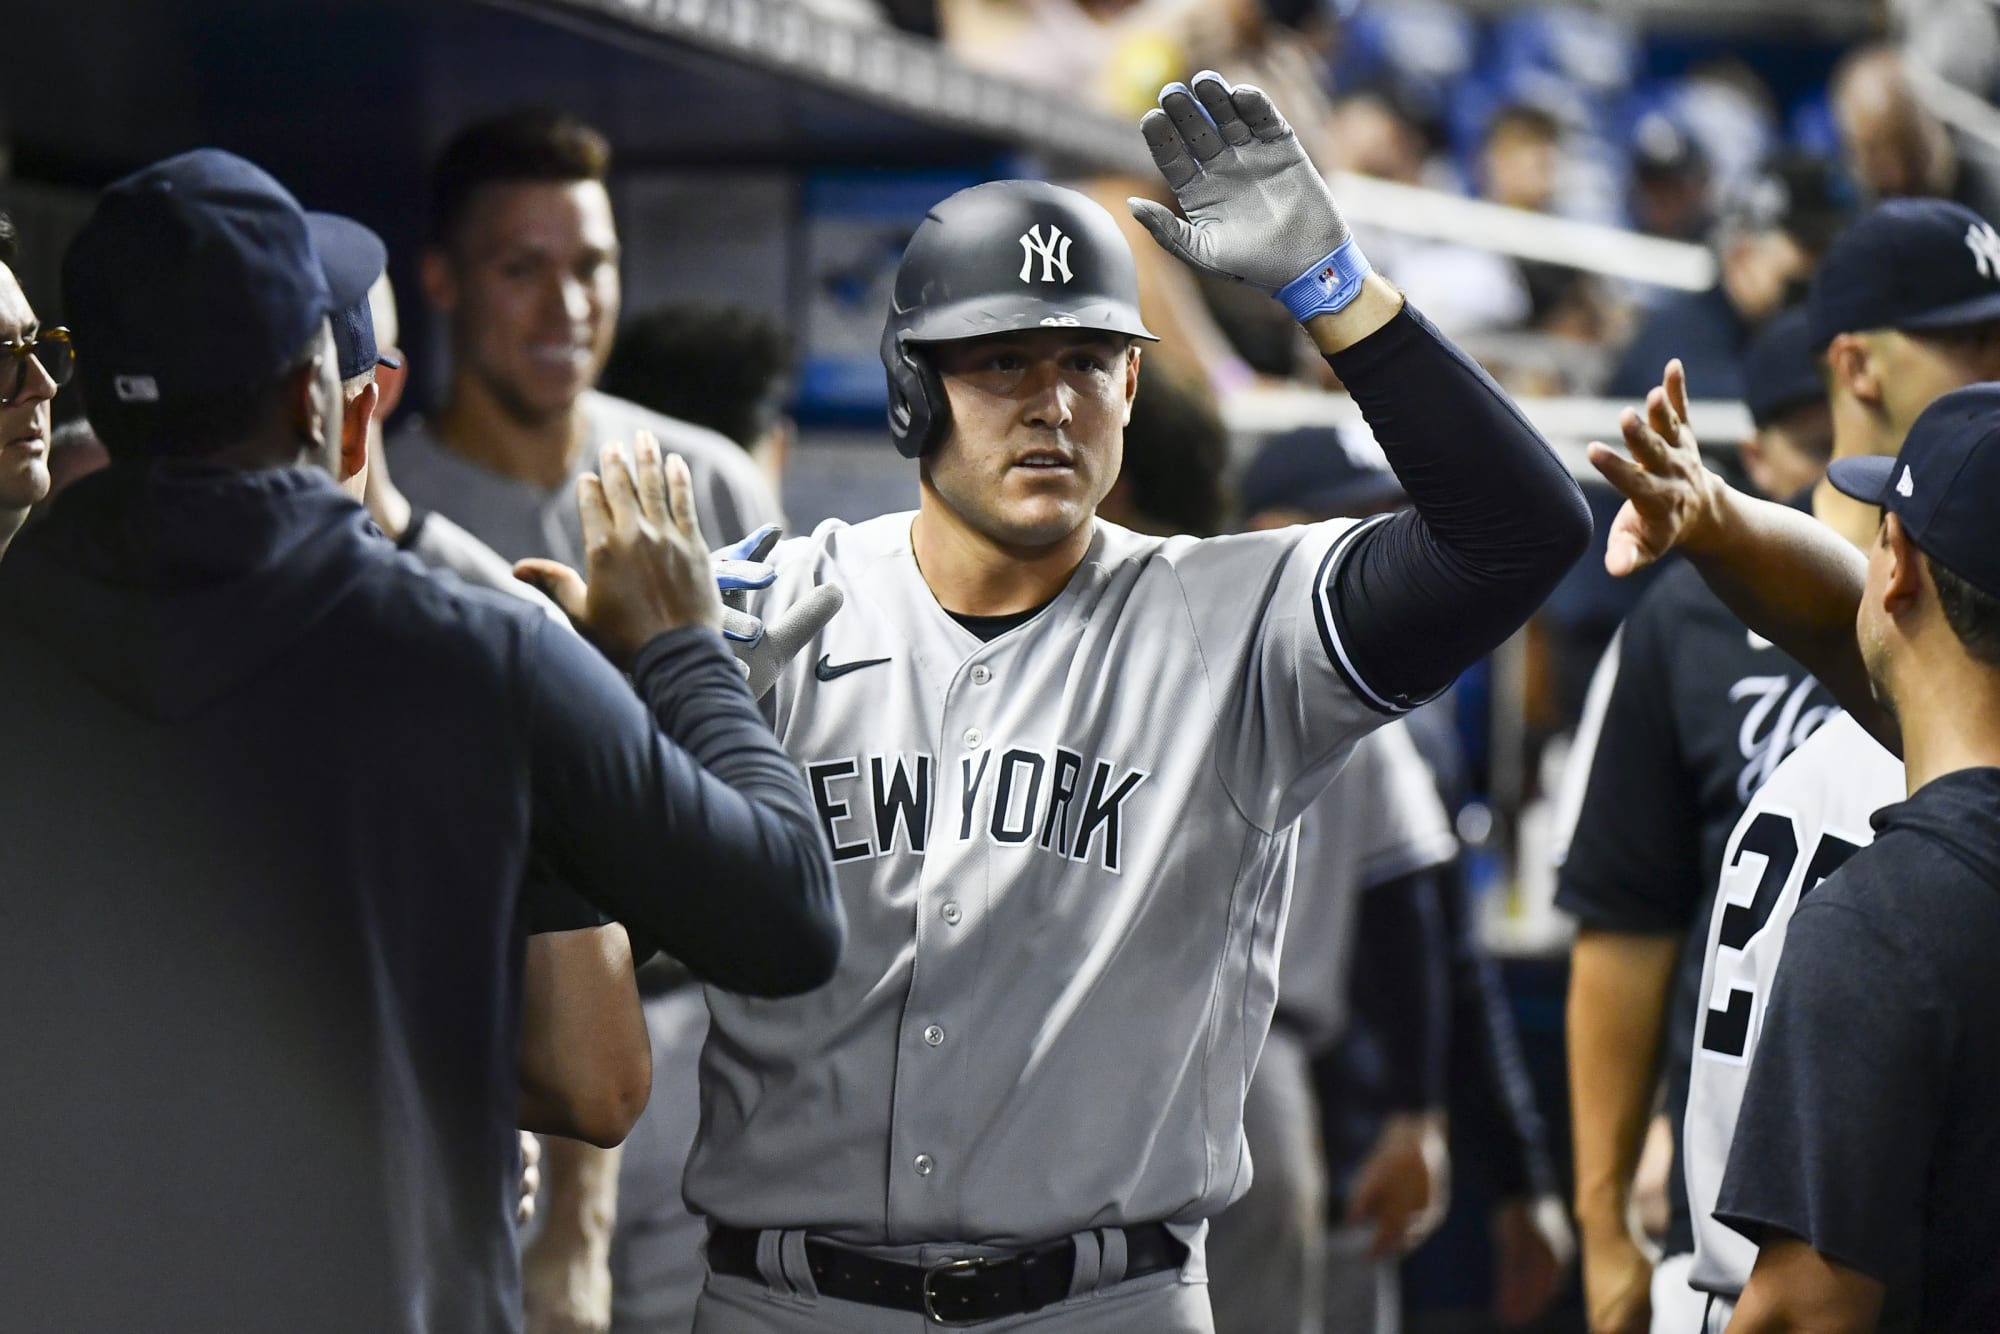 Yankees Game Today Yankees vs Marlins Odds, Pitching Matchup, Starting